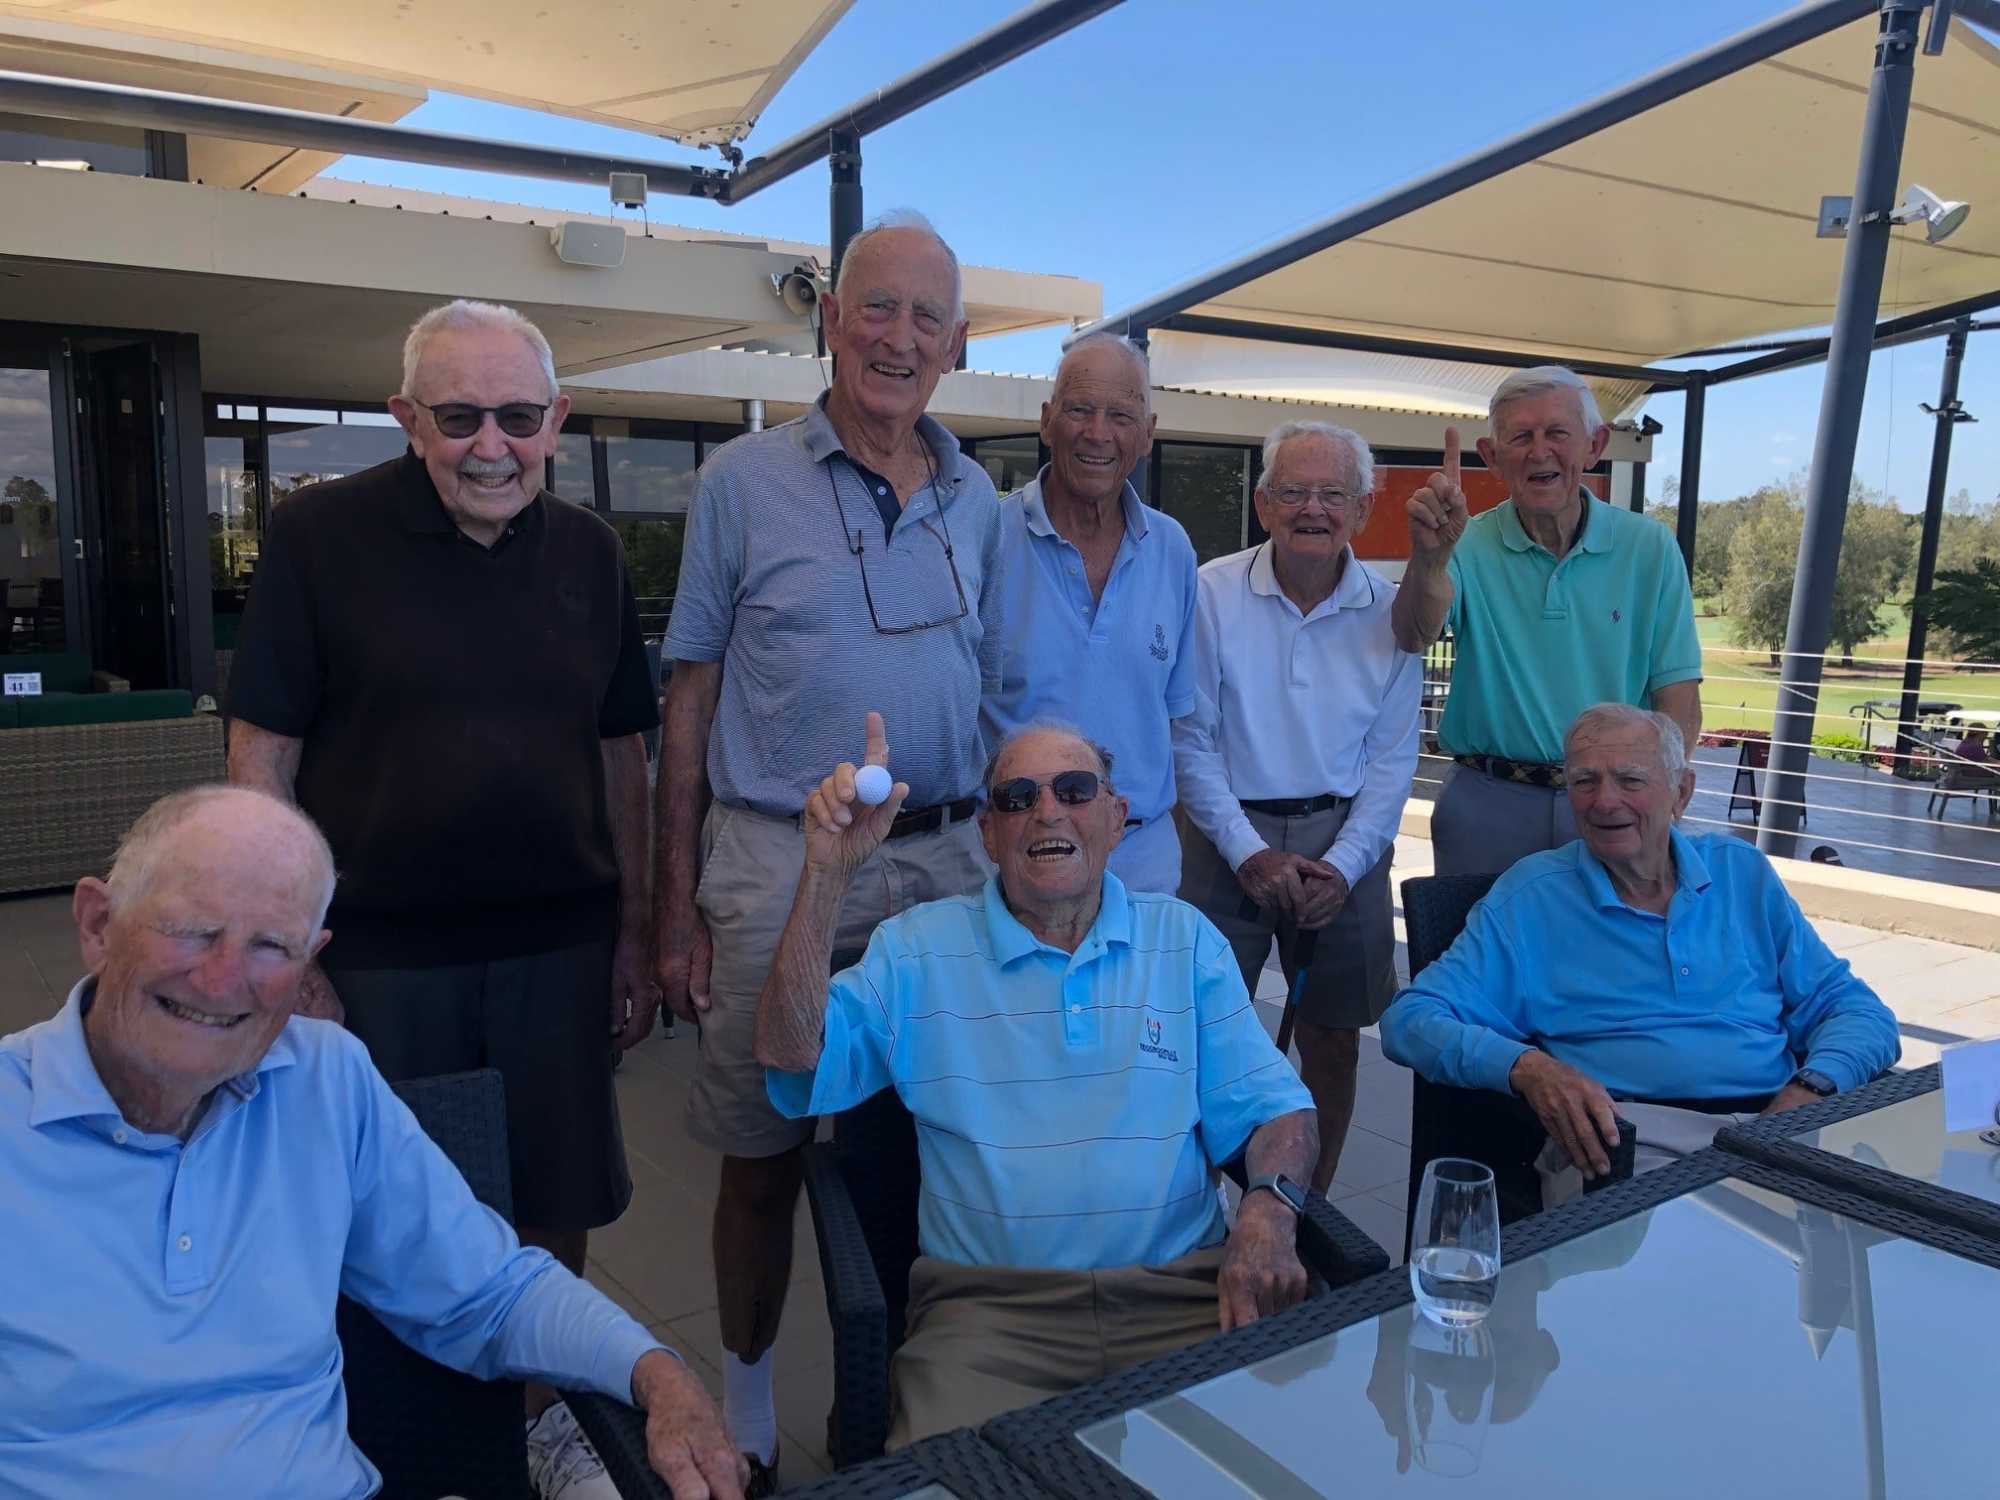 Indooroopilly's self-proclaimed 'Old and Bold' group of members celebrating Hugh Brown's hole-in-one.